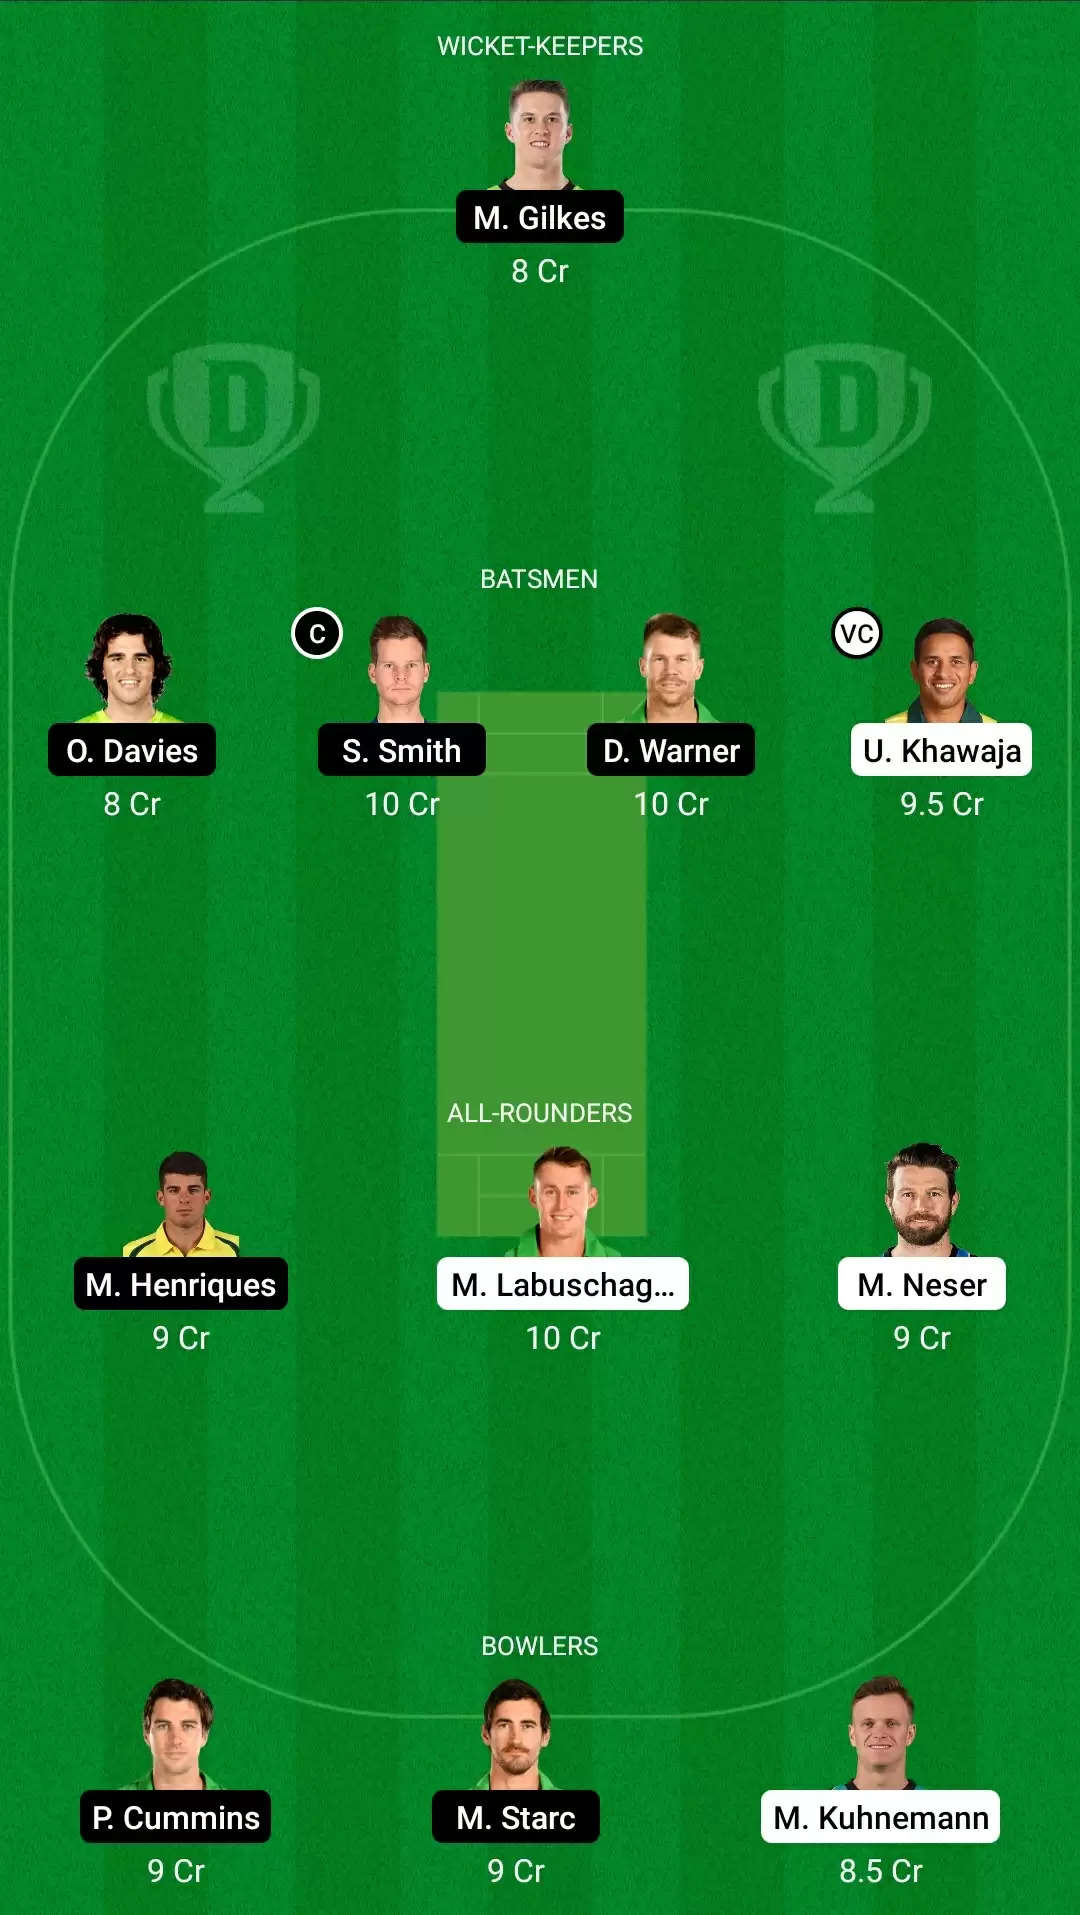 Marsh Cup 2021, Match 13: QUN vs NSW Dream11 Prediction, Fantasy Cricket Tips, Team, Playing 11, Pitch Report, Weather Conditions and Injury Update